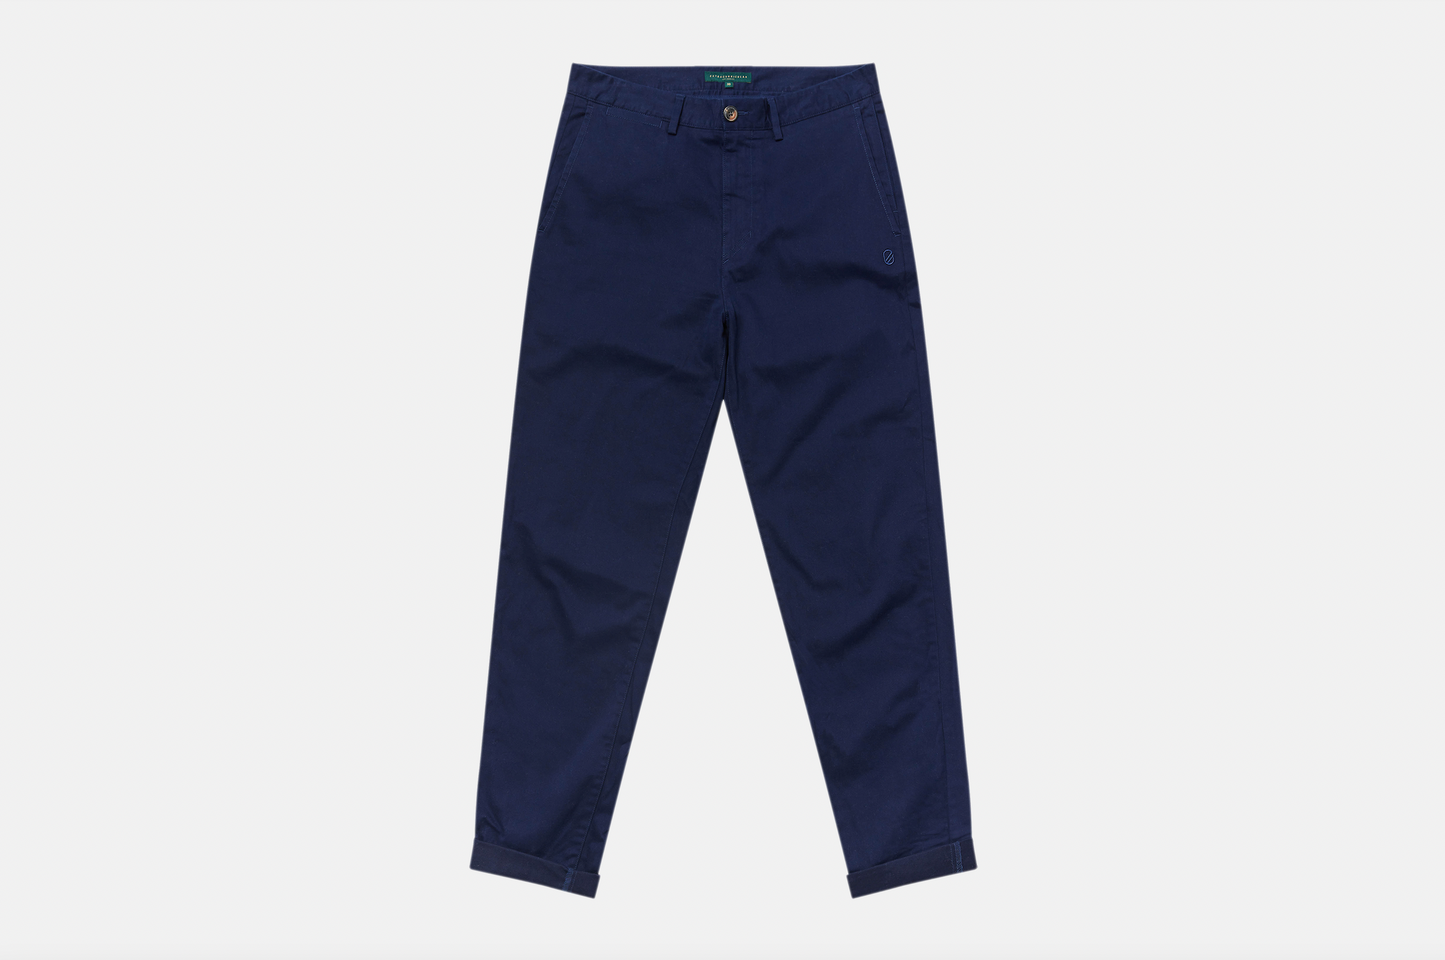 Extra Curricular "Apex Chino" Pant M - Maritime (Navy)